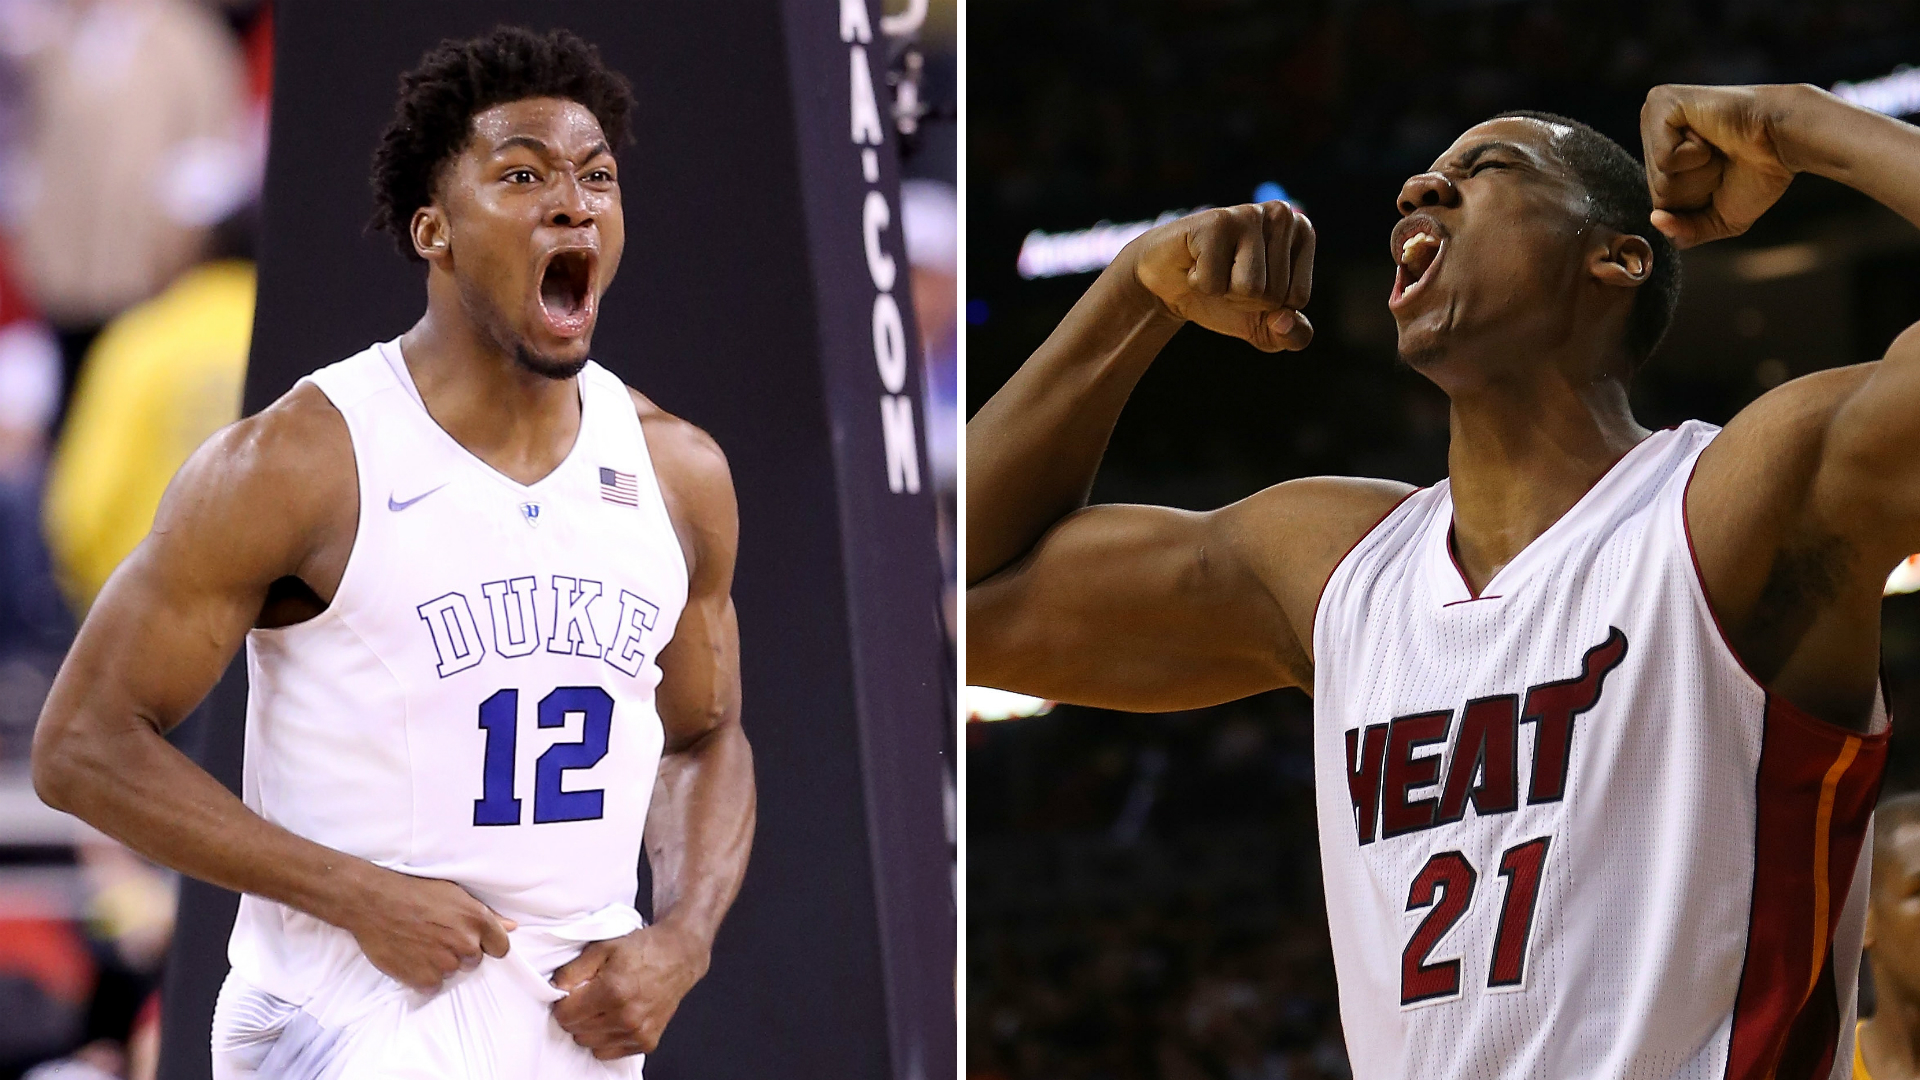 Can Justise Winslow And Hassan Whiteside Keep The Heat